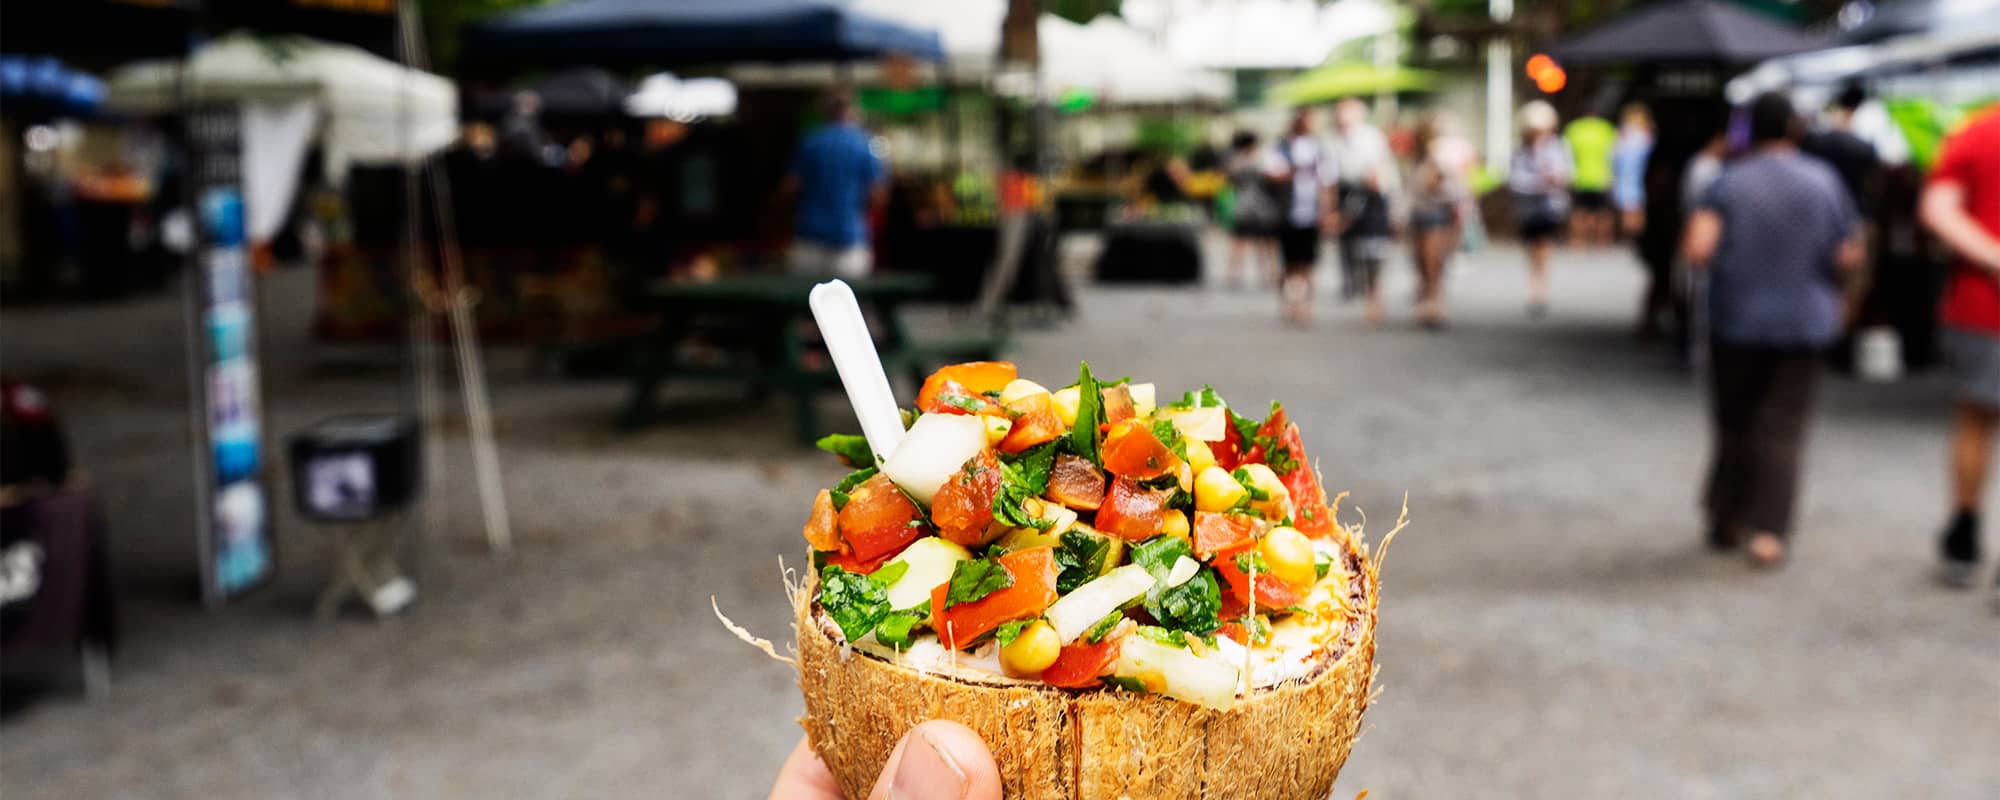 CAIRNS BEST LOCAL MARKETS- Every Day is Market day